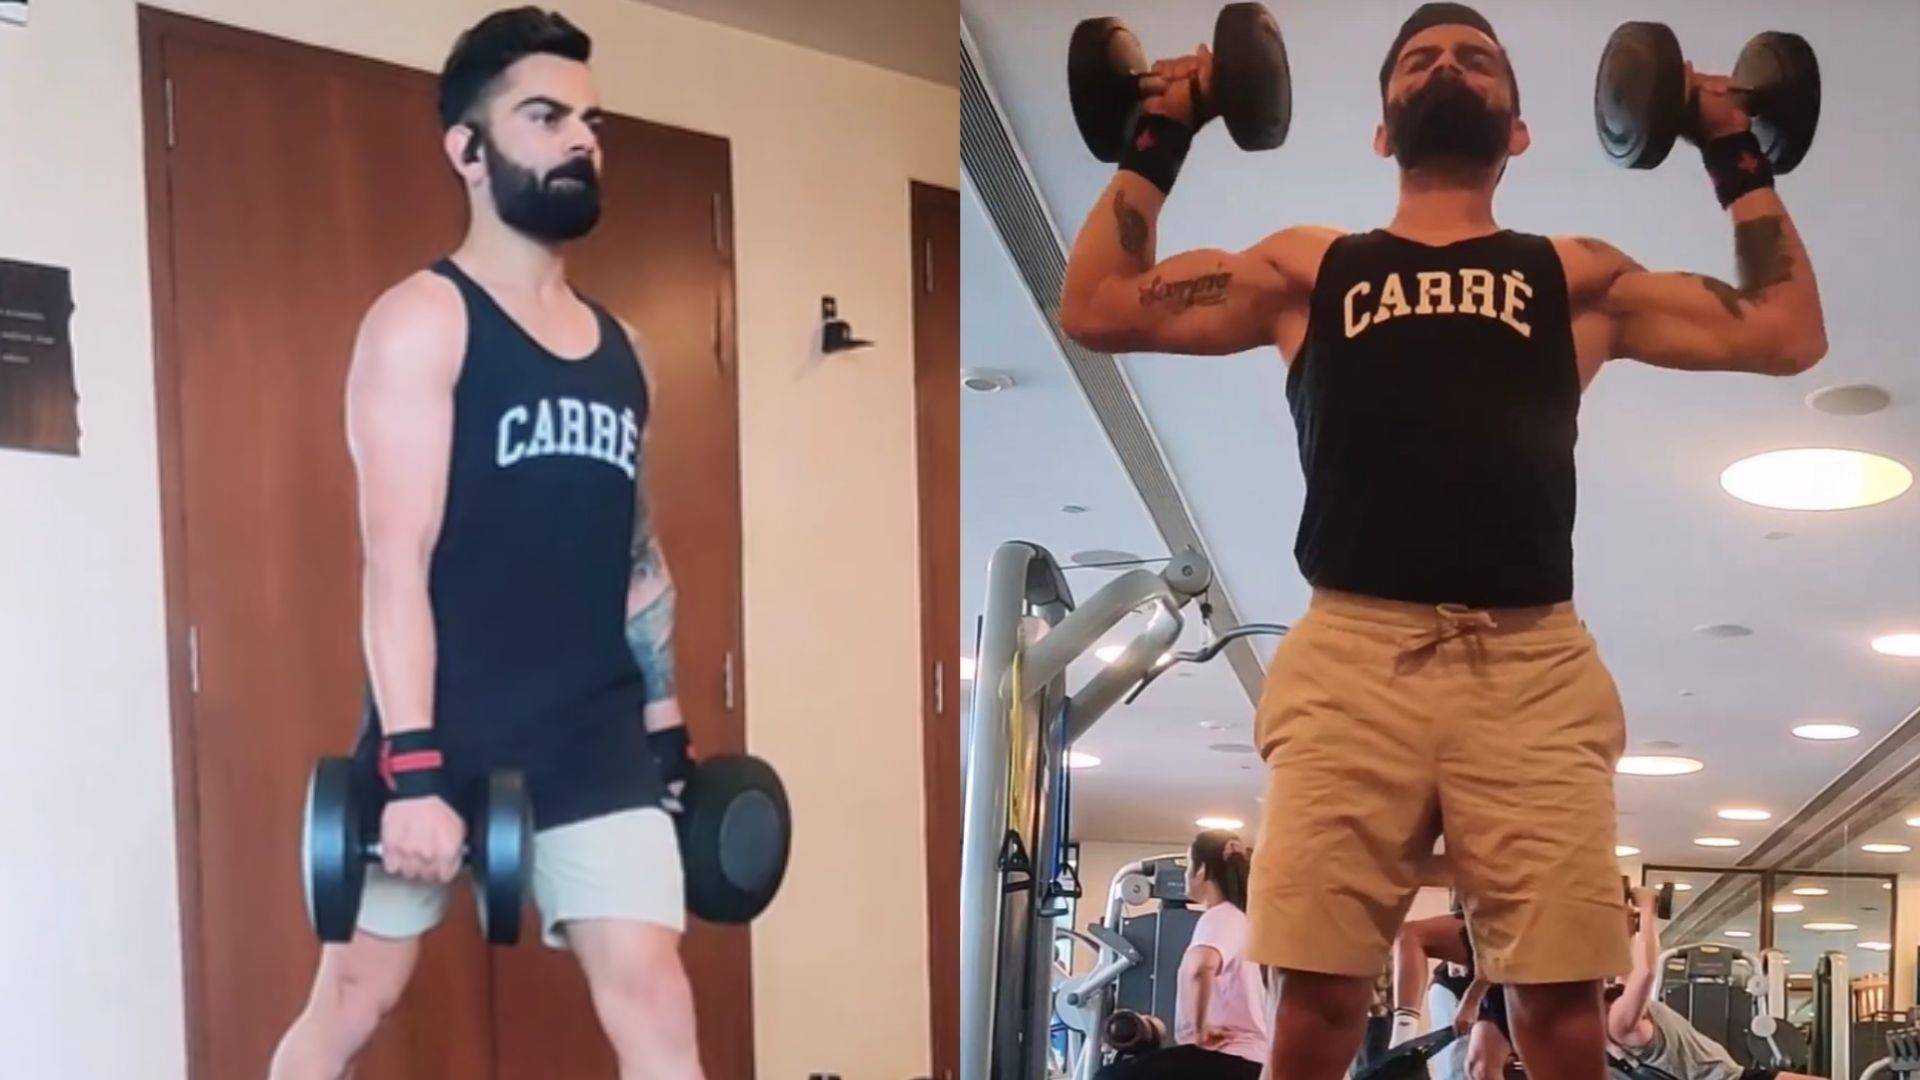 Snippets from the workout video posted by Virat kohli on Instagram